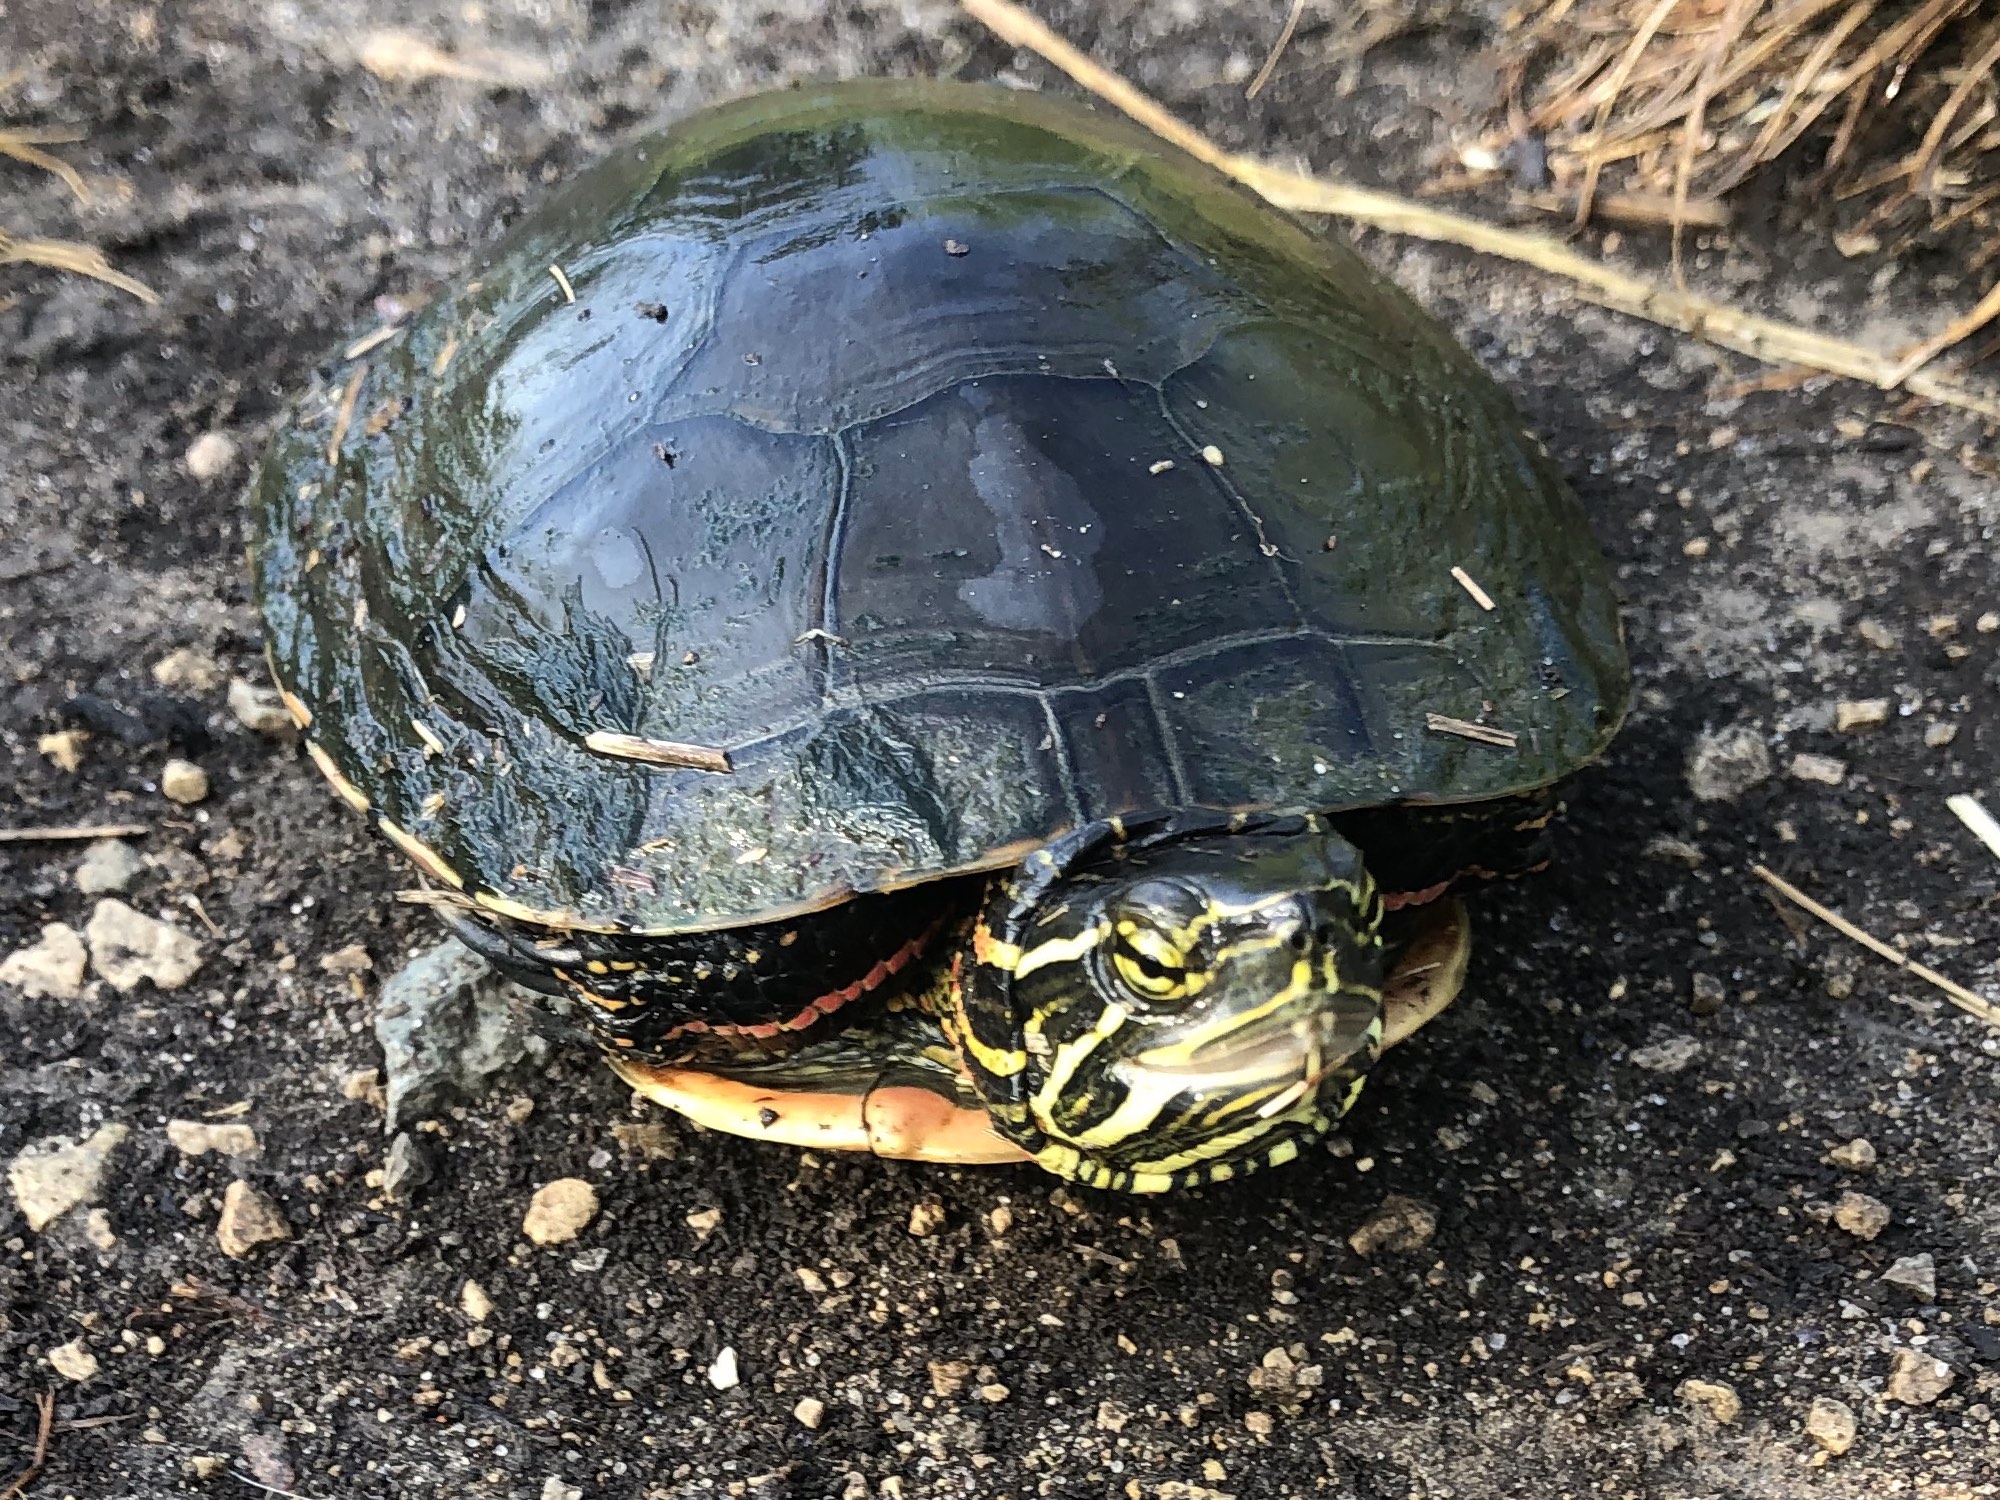 Painted Turtle by Marion Dunn Pond in Madison, Wisconsin on June 18, 2021.